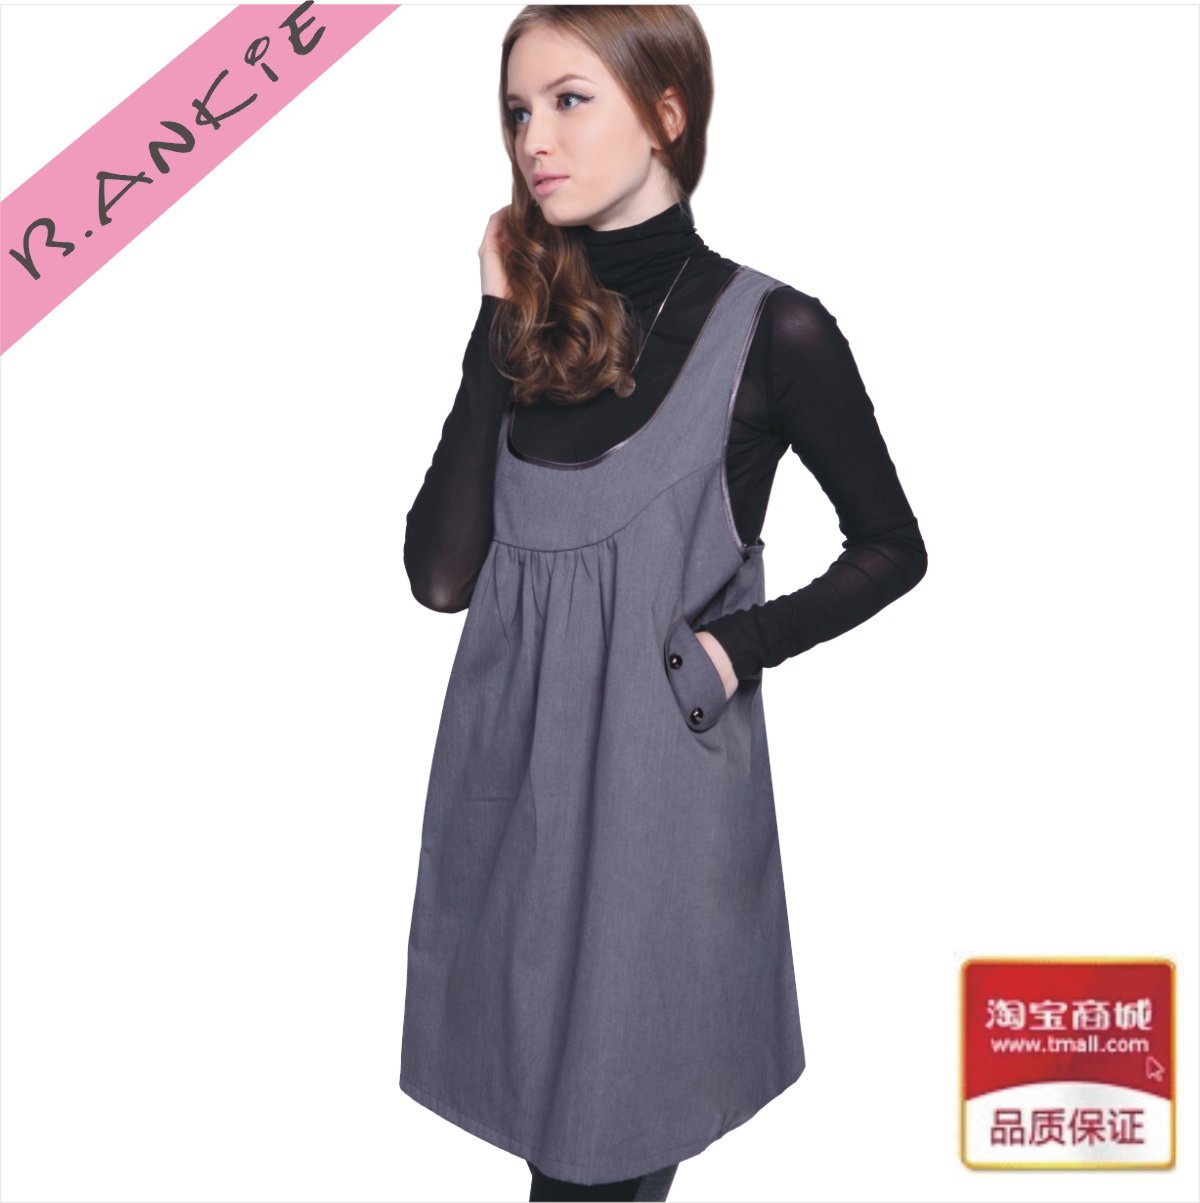 Radiation-resistant maternity clothing maternity radiation-resistant clothes radiation-resistant clothes apron baq535